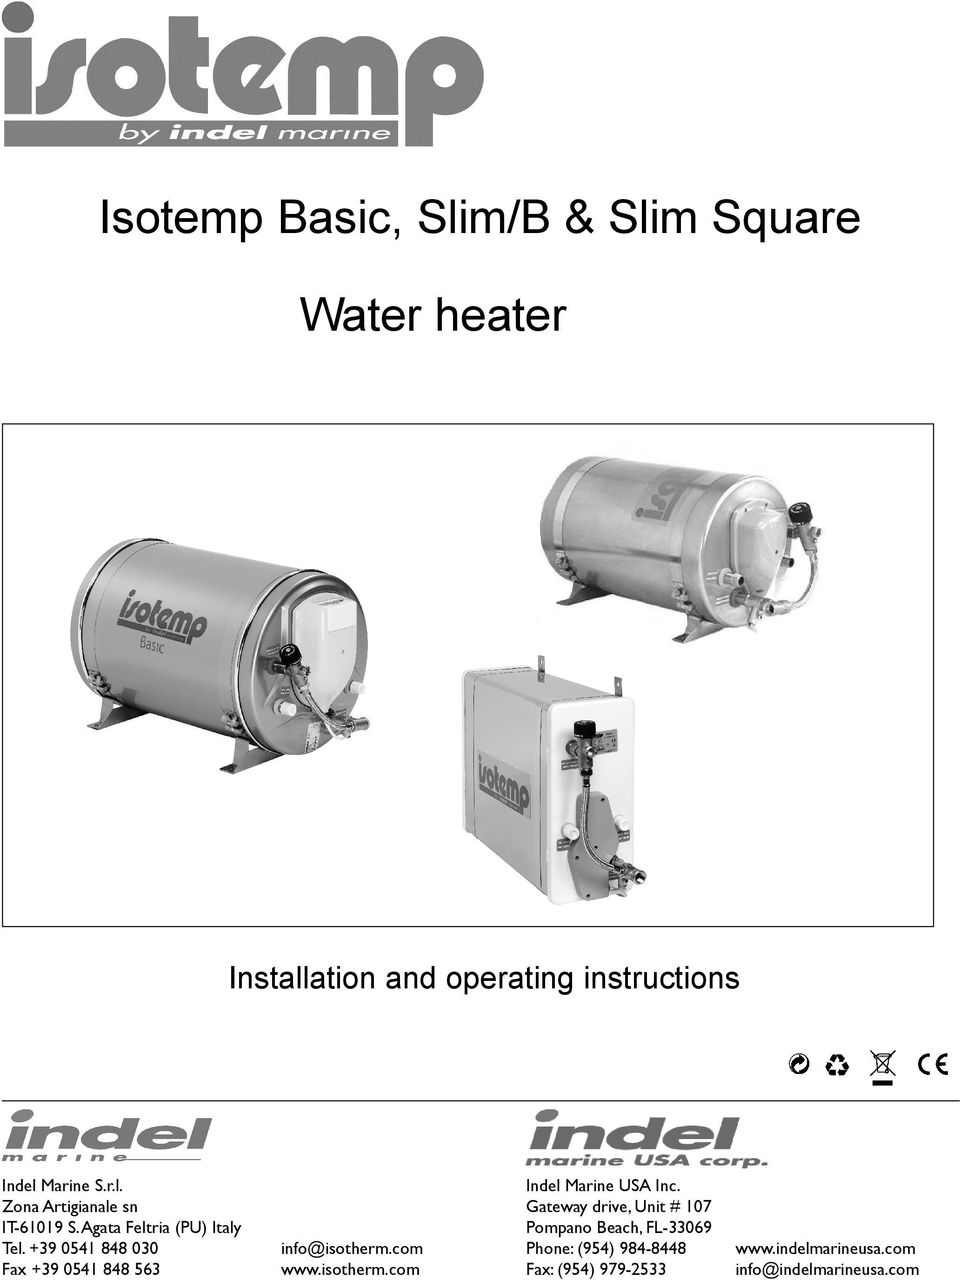 39 0541 848 030 Fax 39 0541 848 563 info@isotherm.com www.isotherm.com Indel Marine USA Inc.